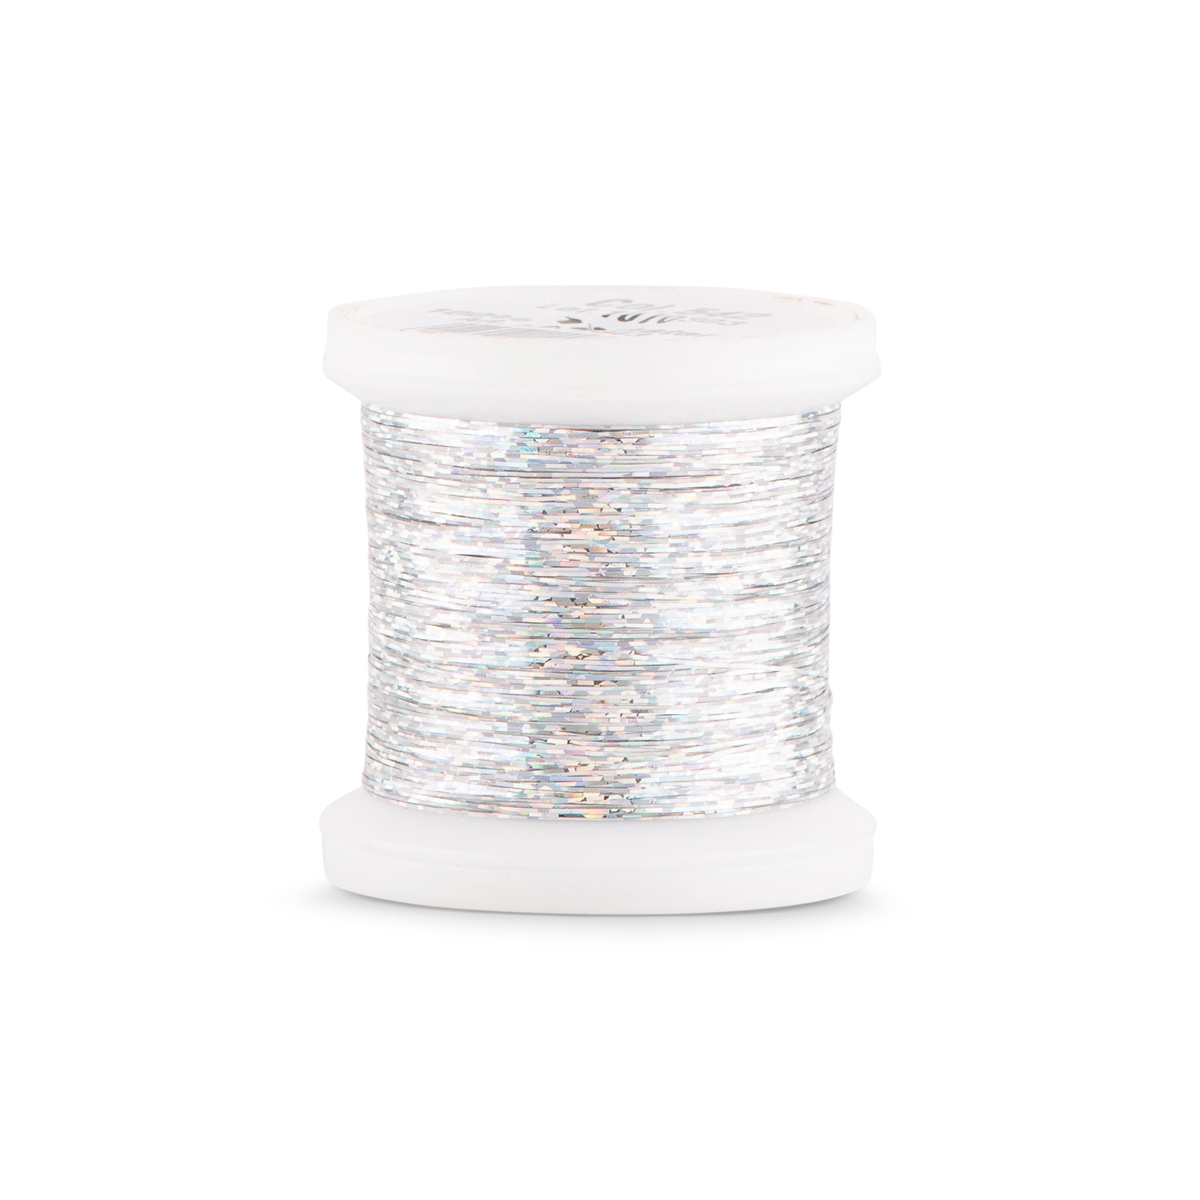 Madeira FS Metallic #40 Embroidery Thread - Spools 1,100 yds Silver - —  AllStitch Embroidery Supplies